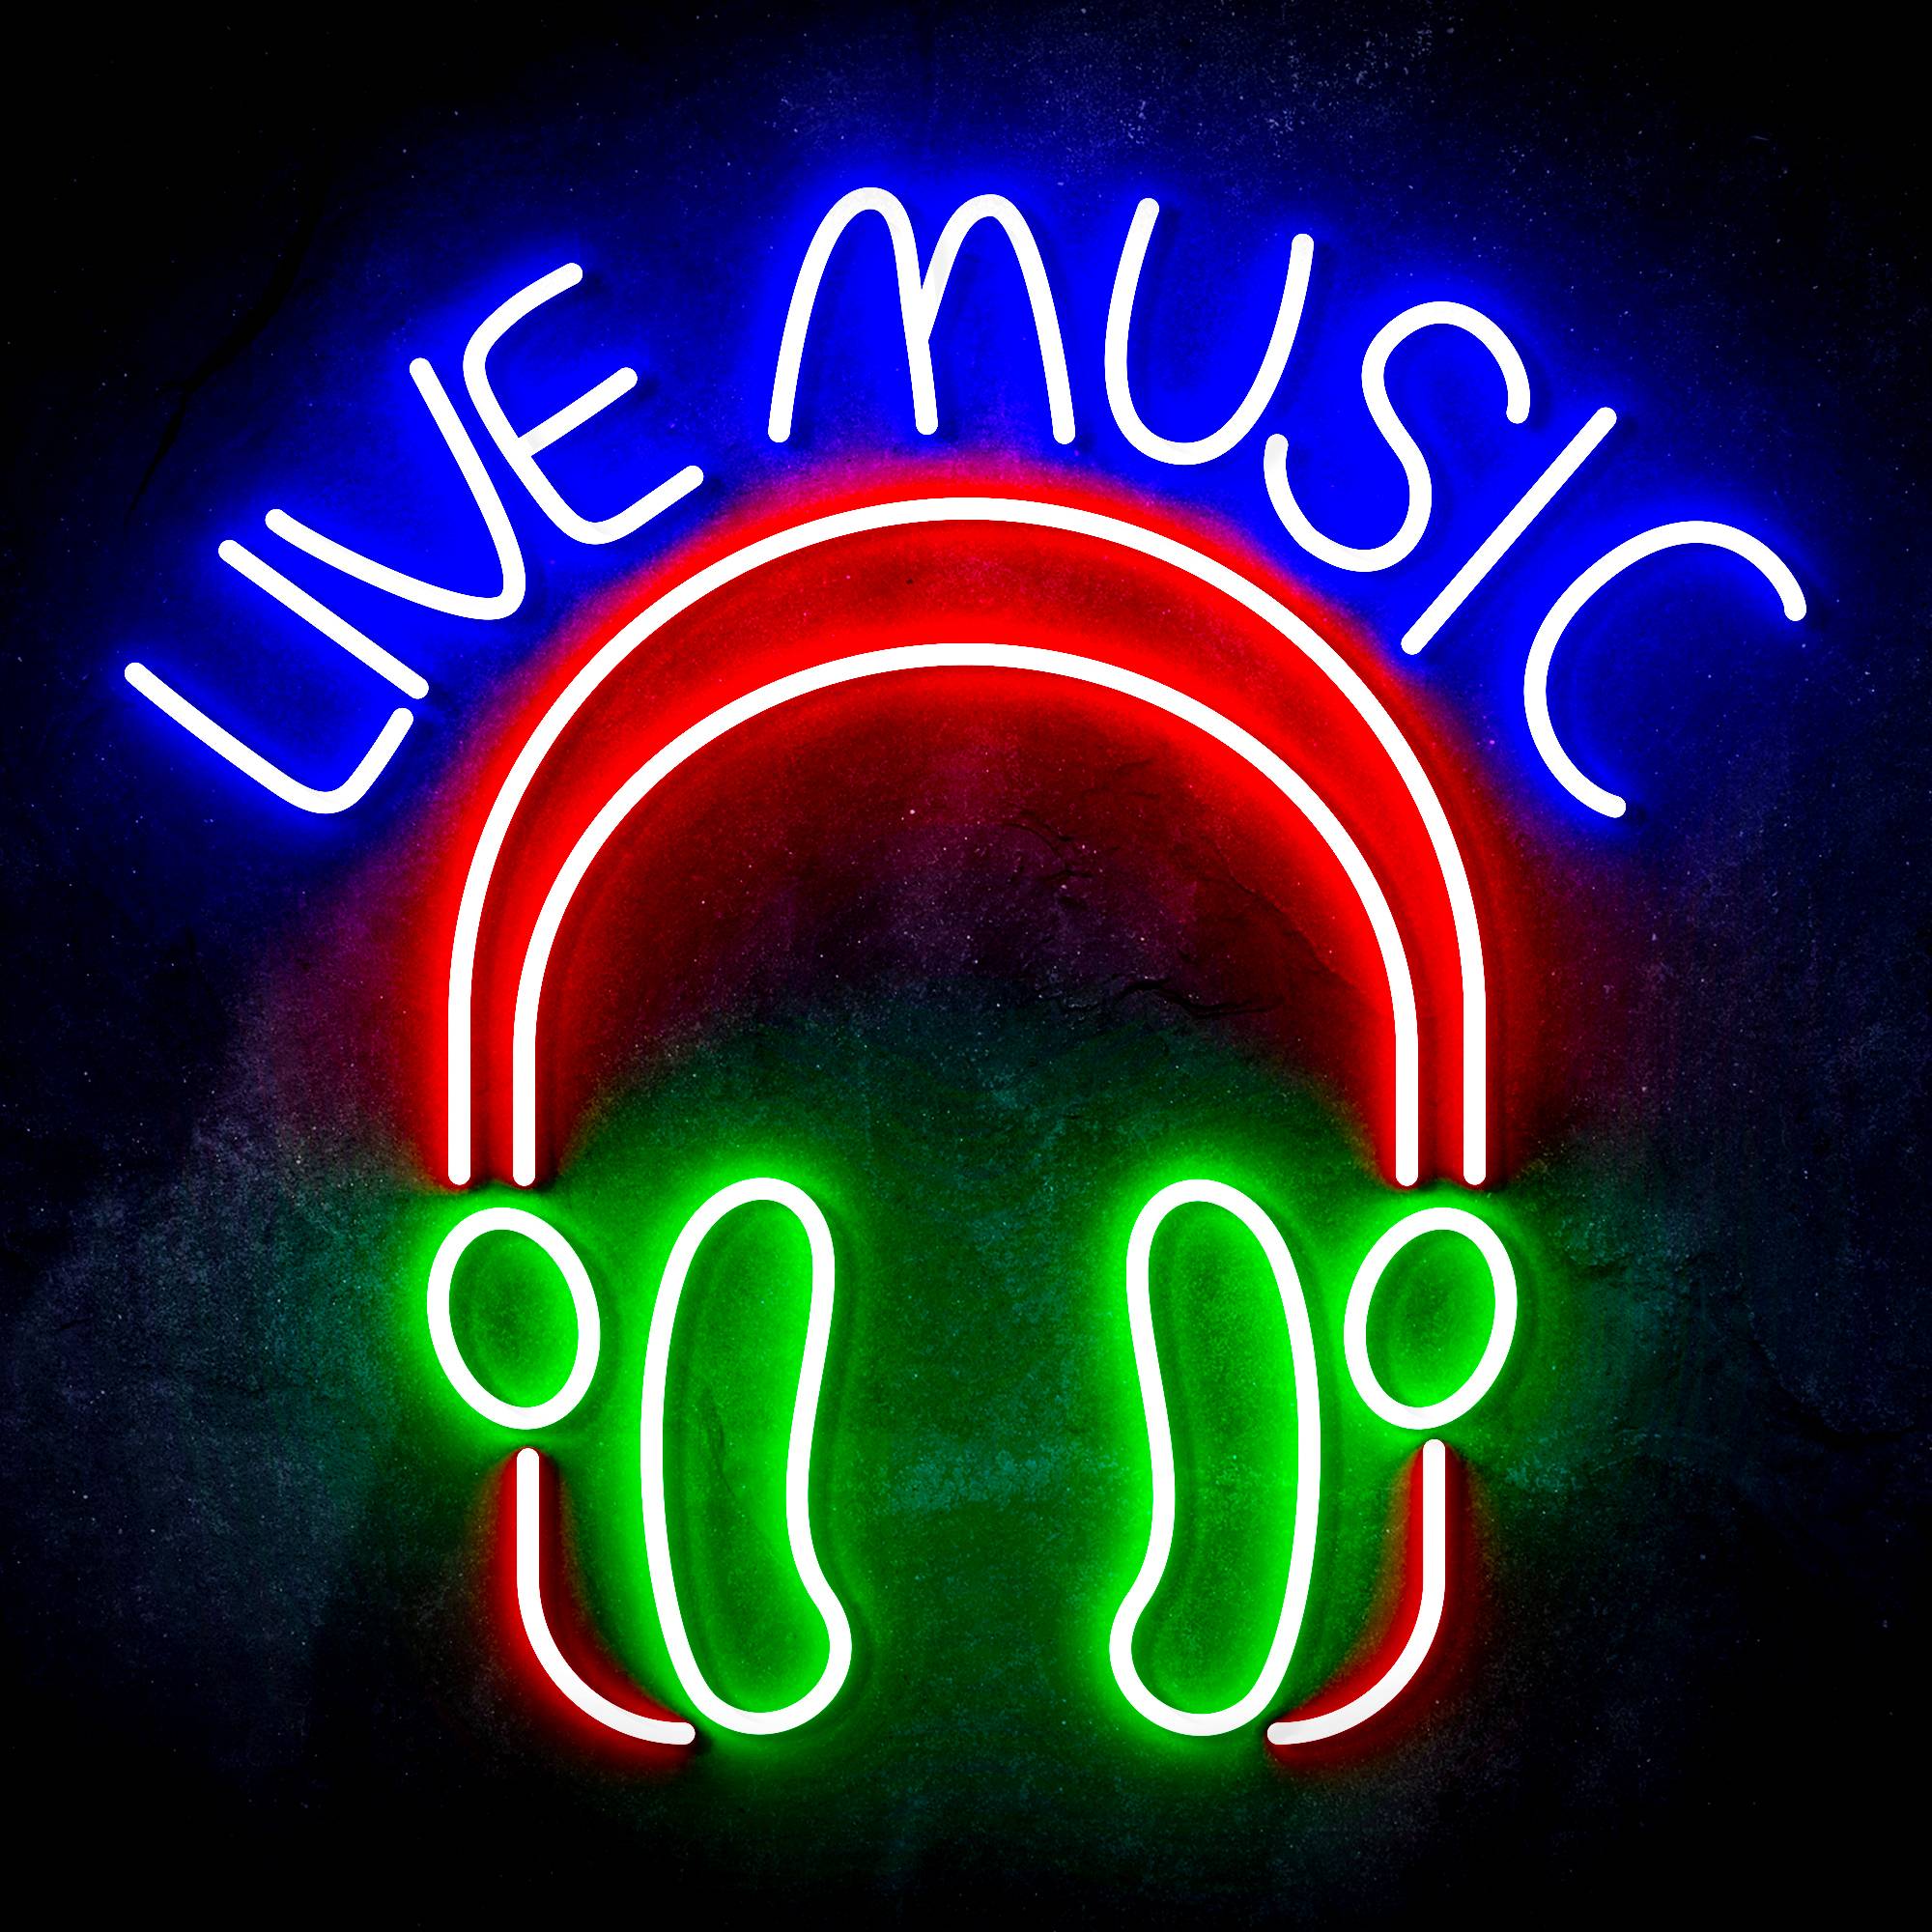 LIVE MUSIC with Earphone LED Neon Sign